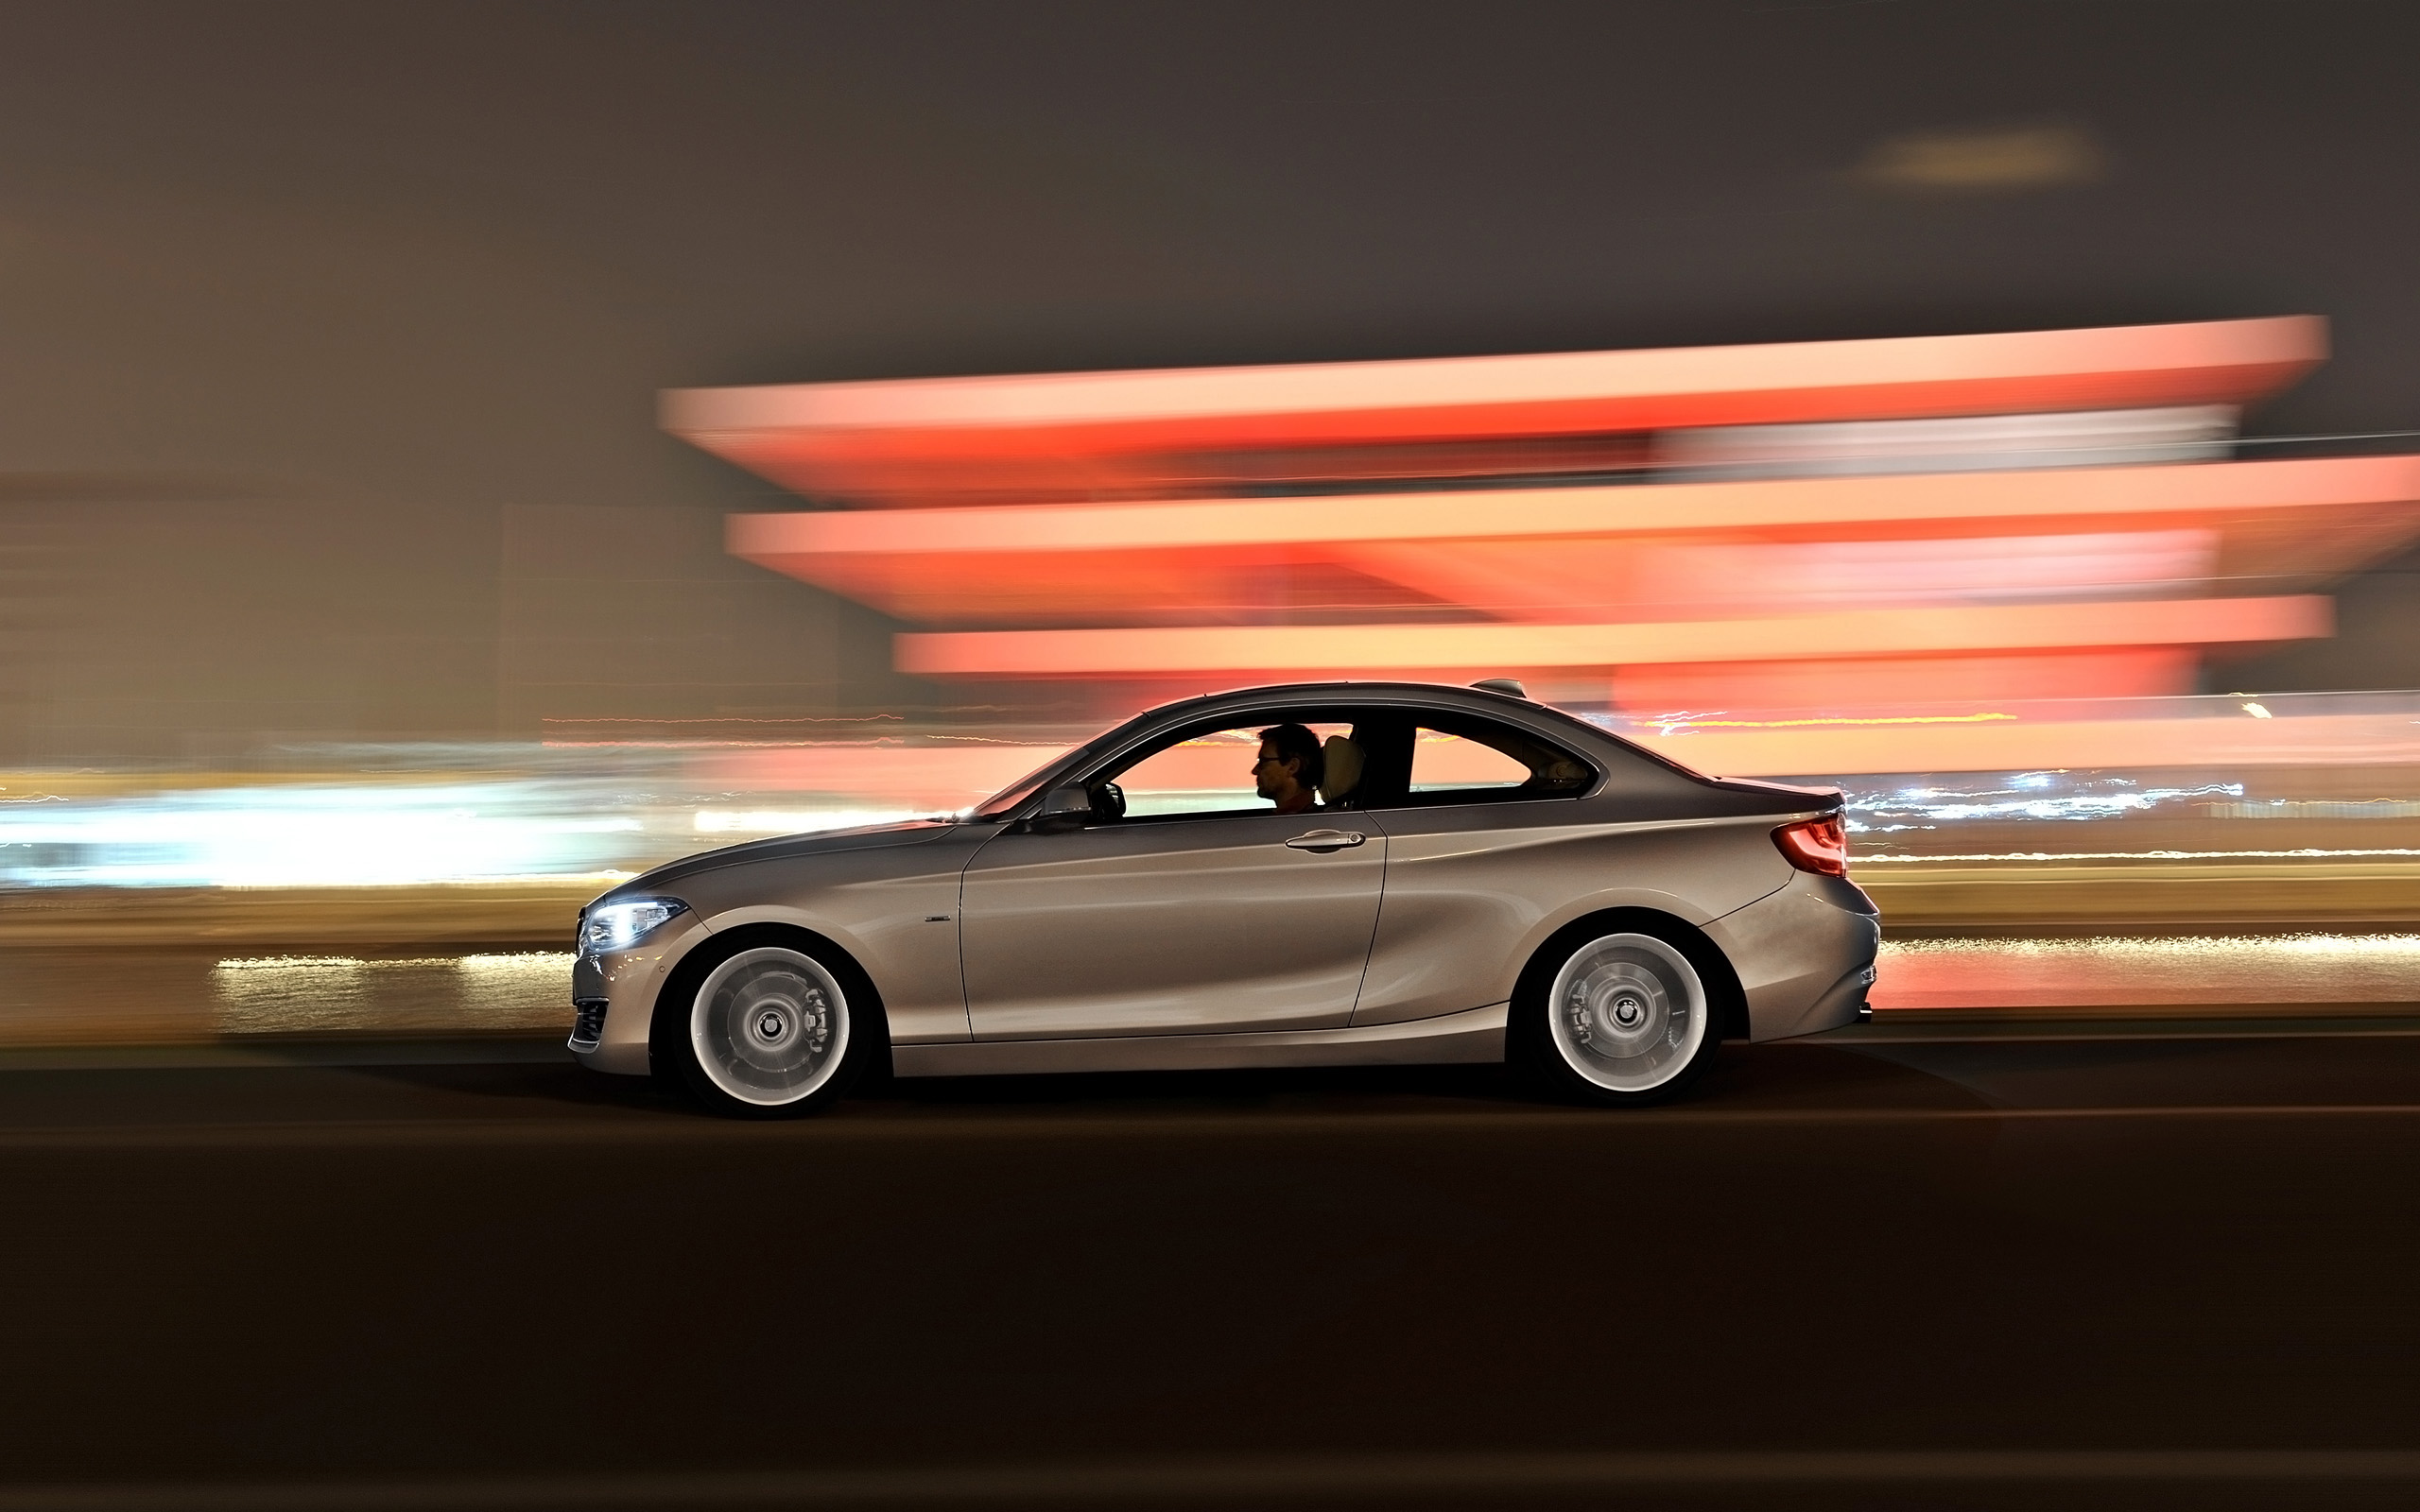 2014, Bmw, 2 series, Coupe, Hs Wallpaper